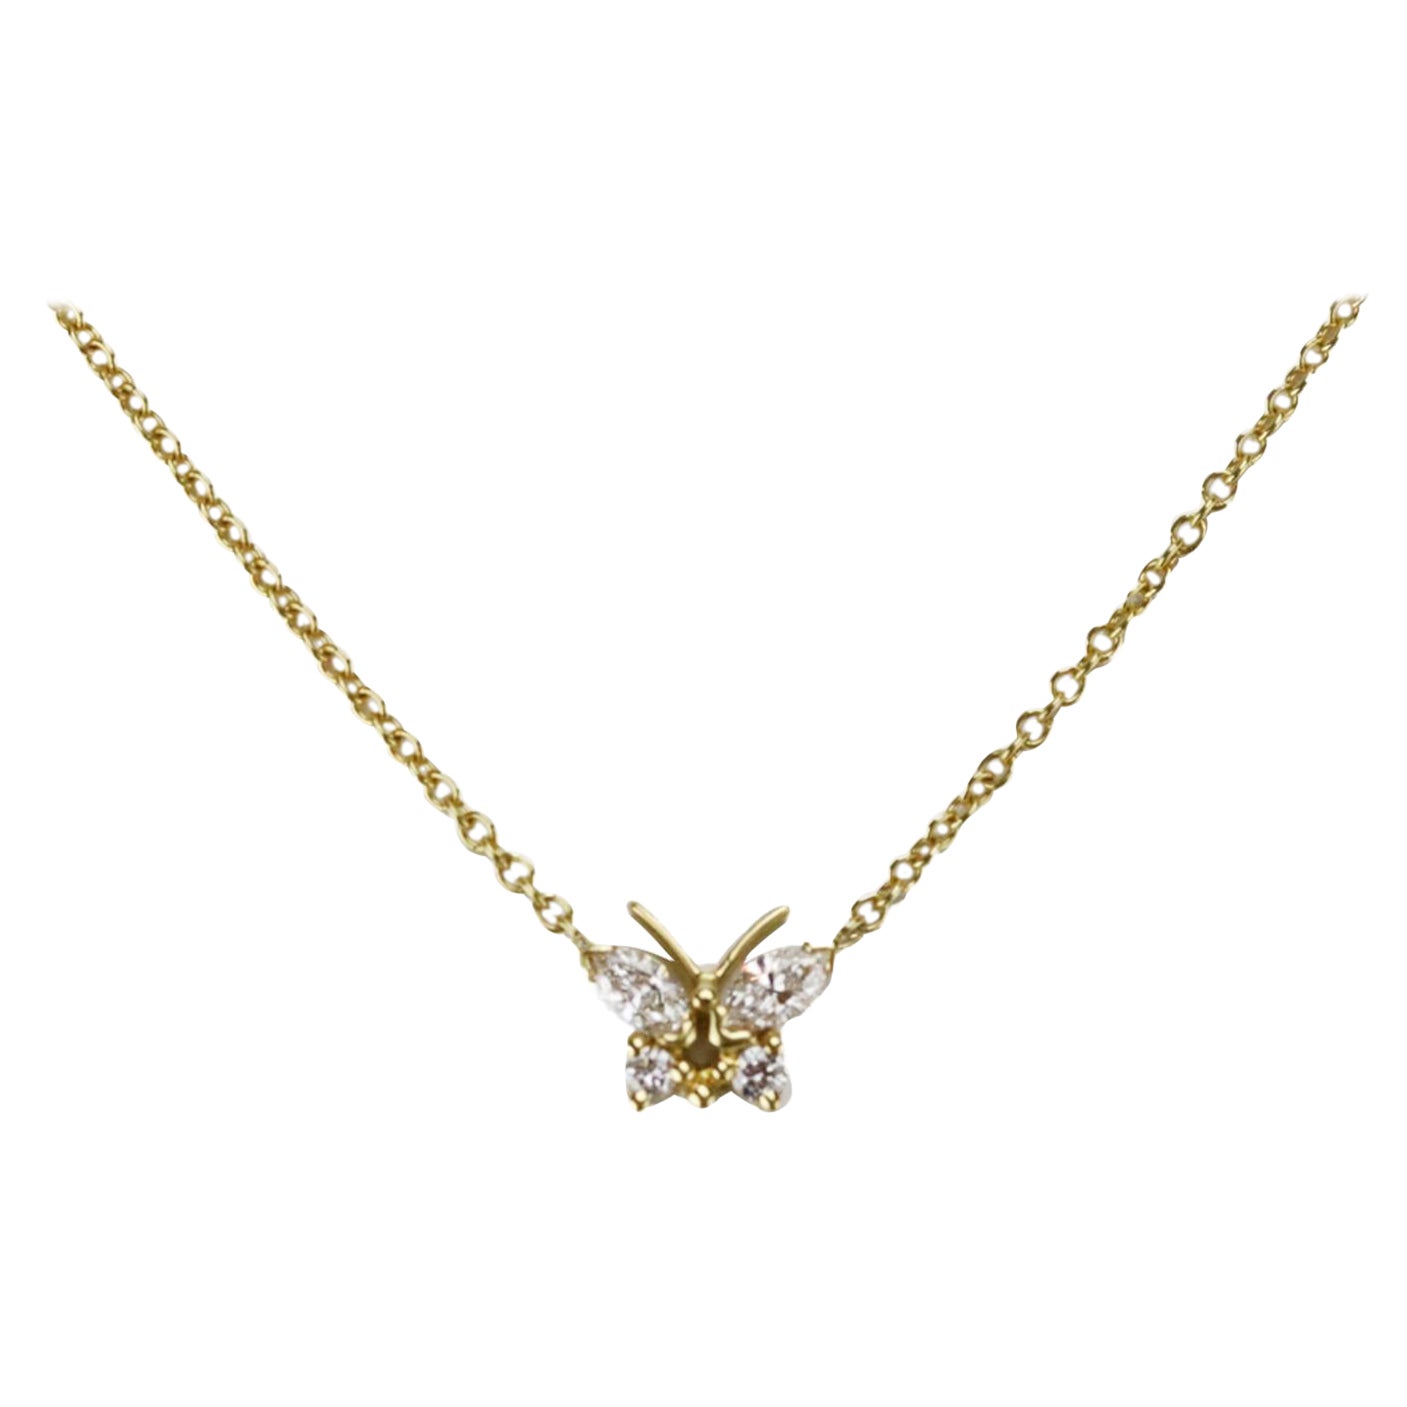 Maria Tash Butterfly 18K Yellow Gold And Diamond Necklace 